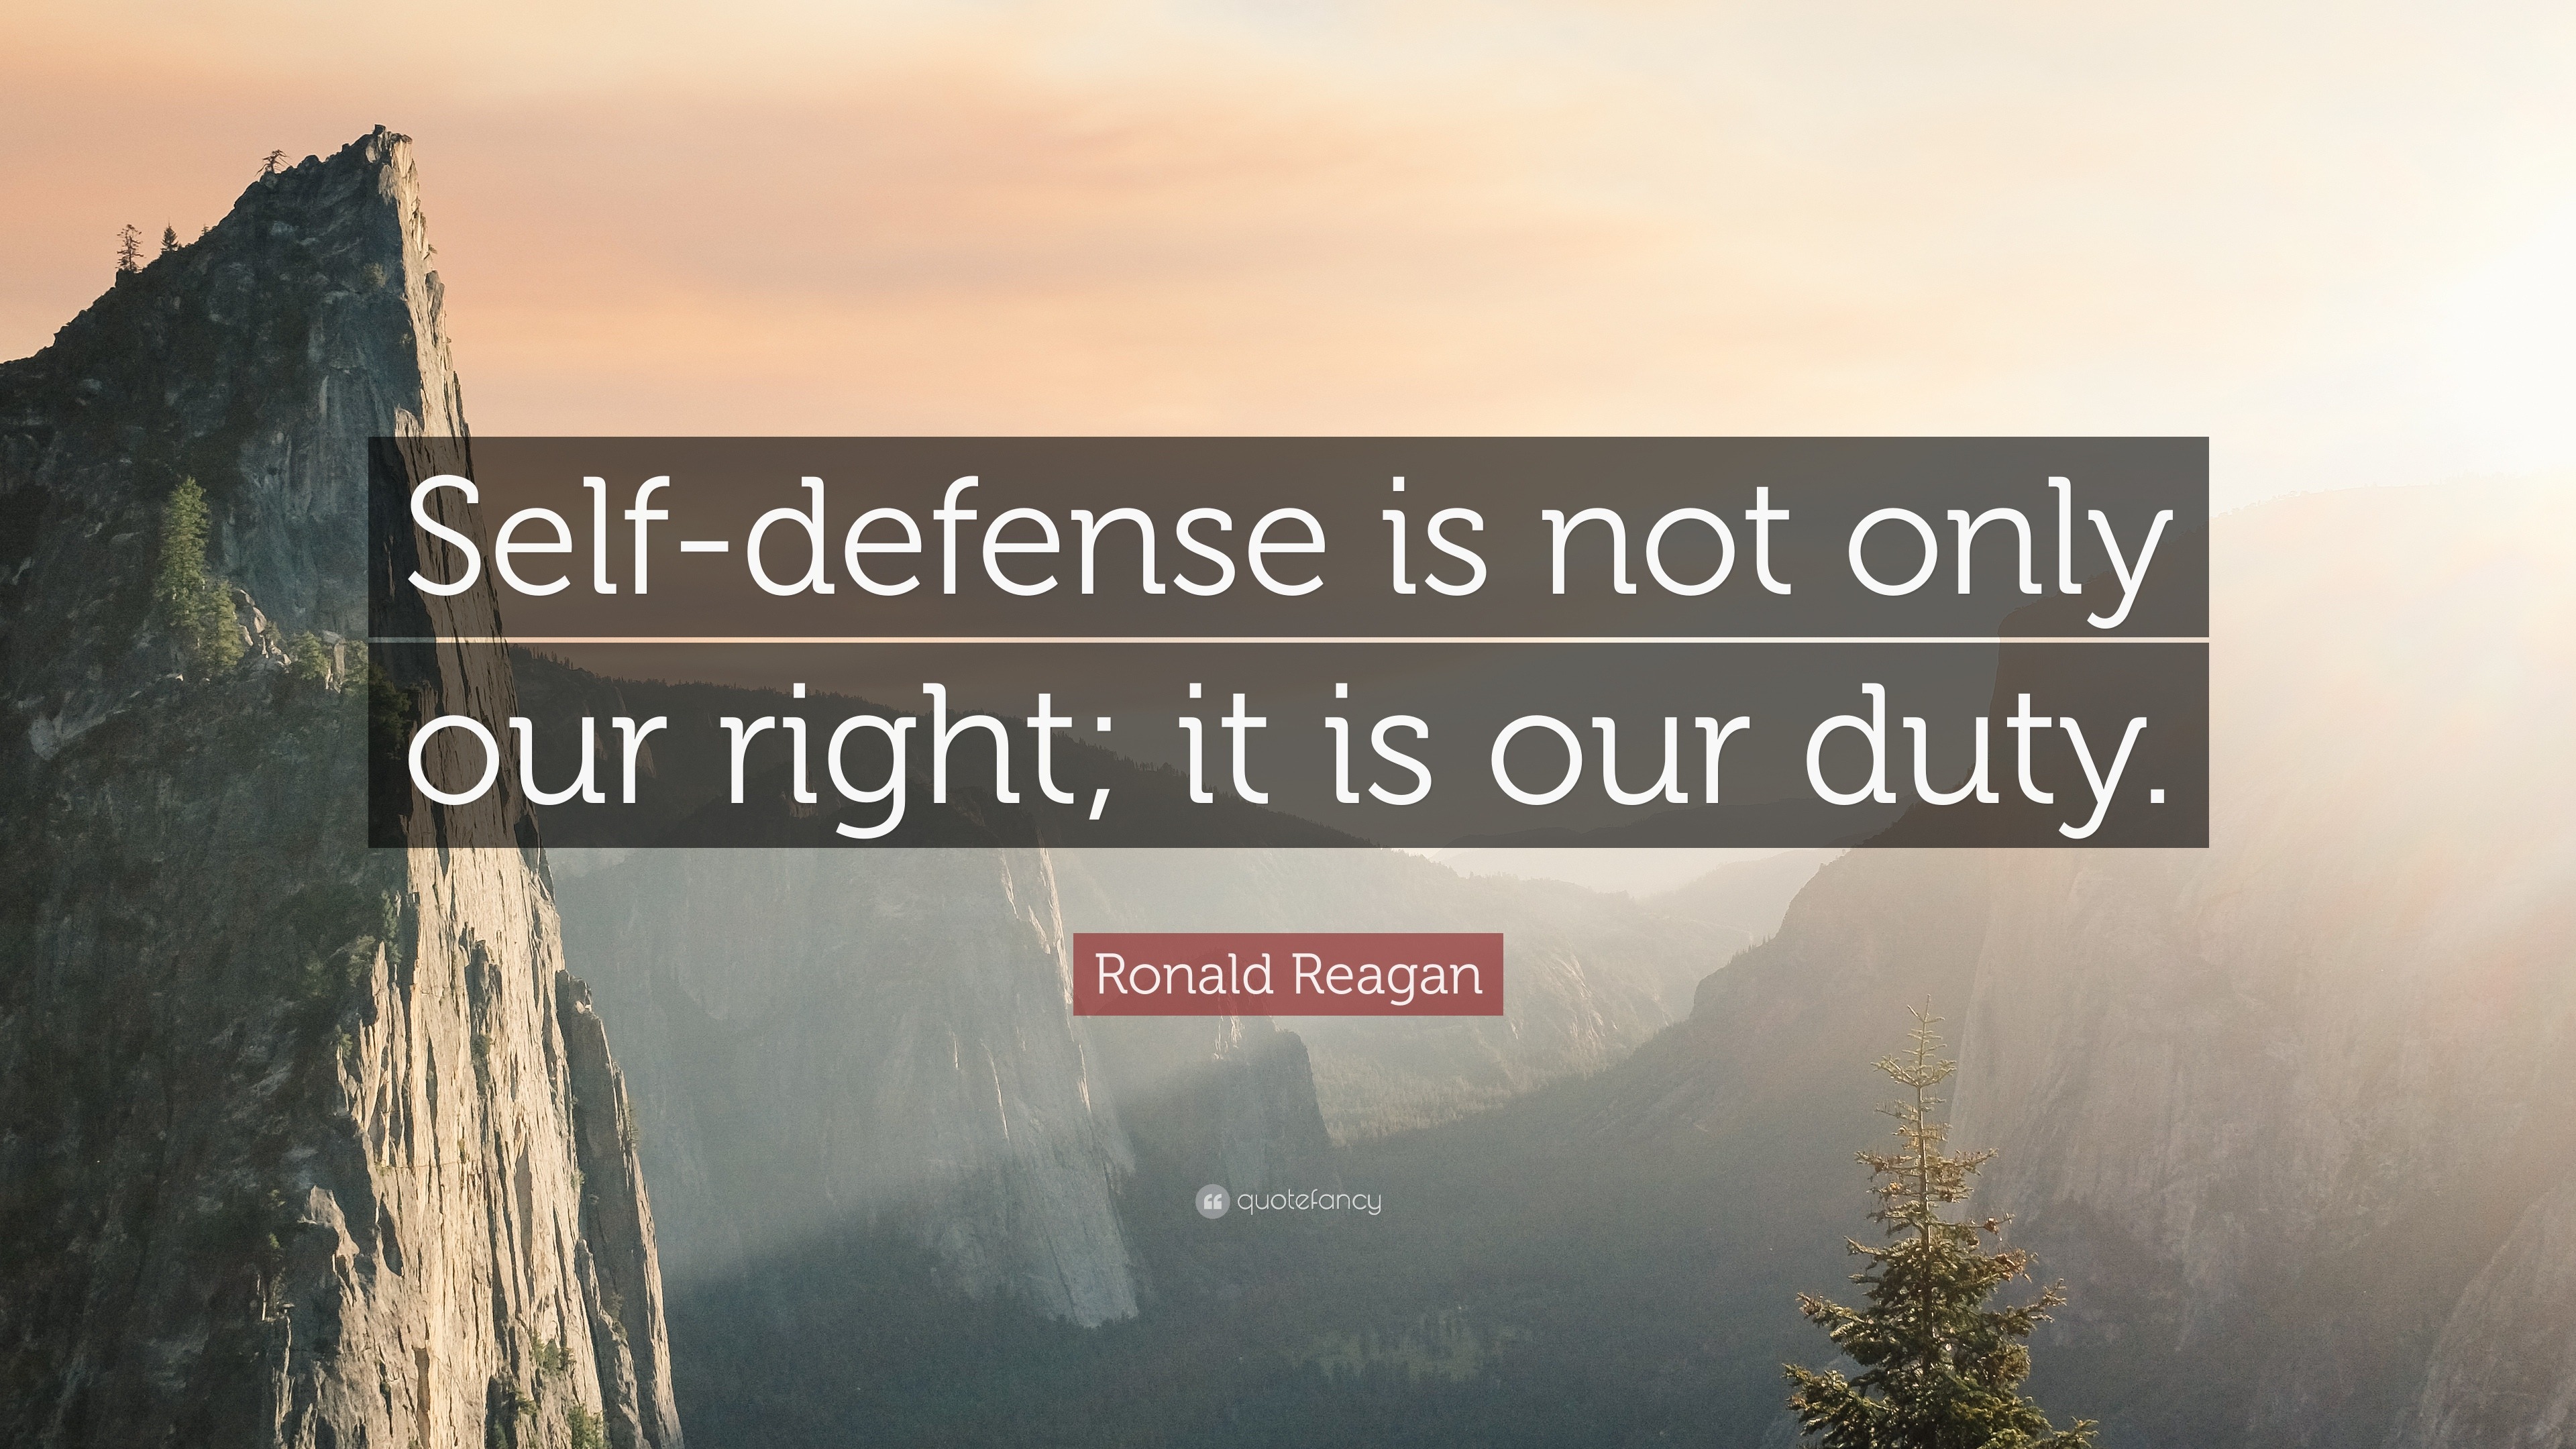 Ronald Reagan Quote Self Defense Is Not Only Our Right It Is Our Duty 12 Wallpapers Quotefancy